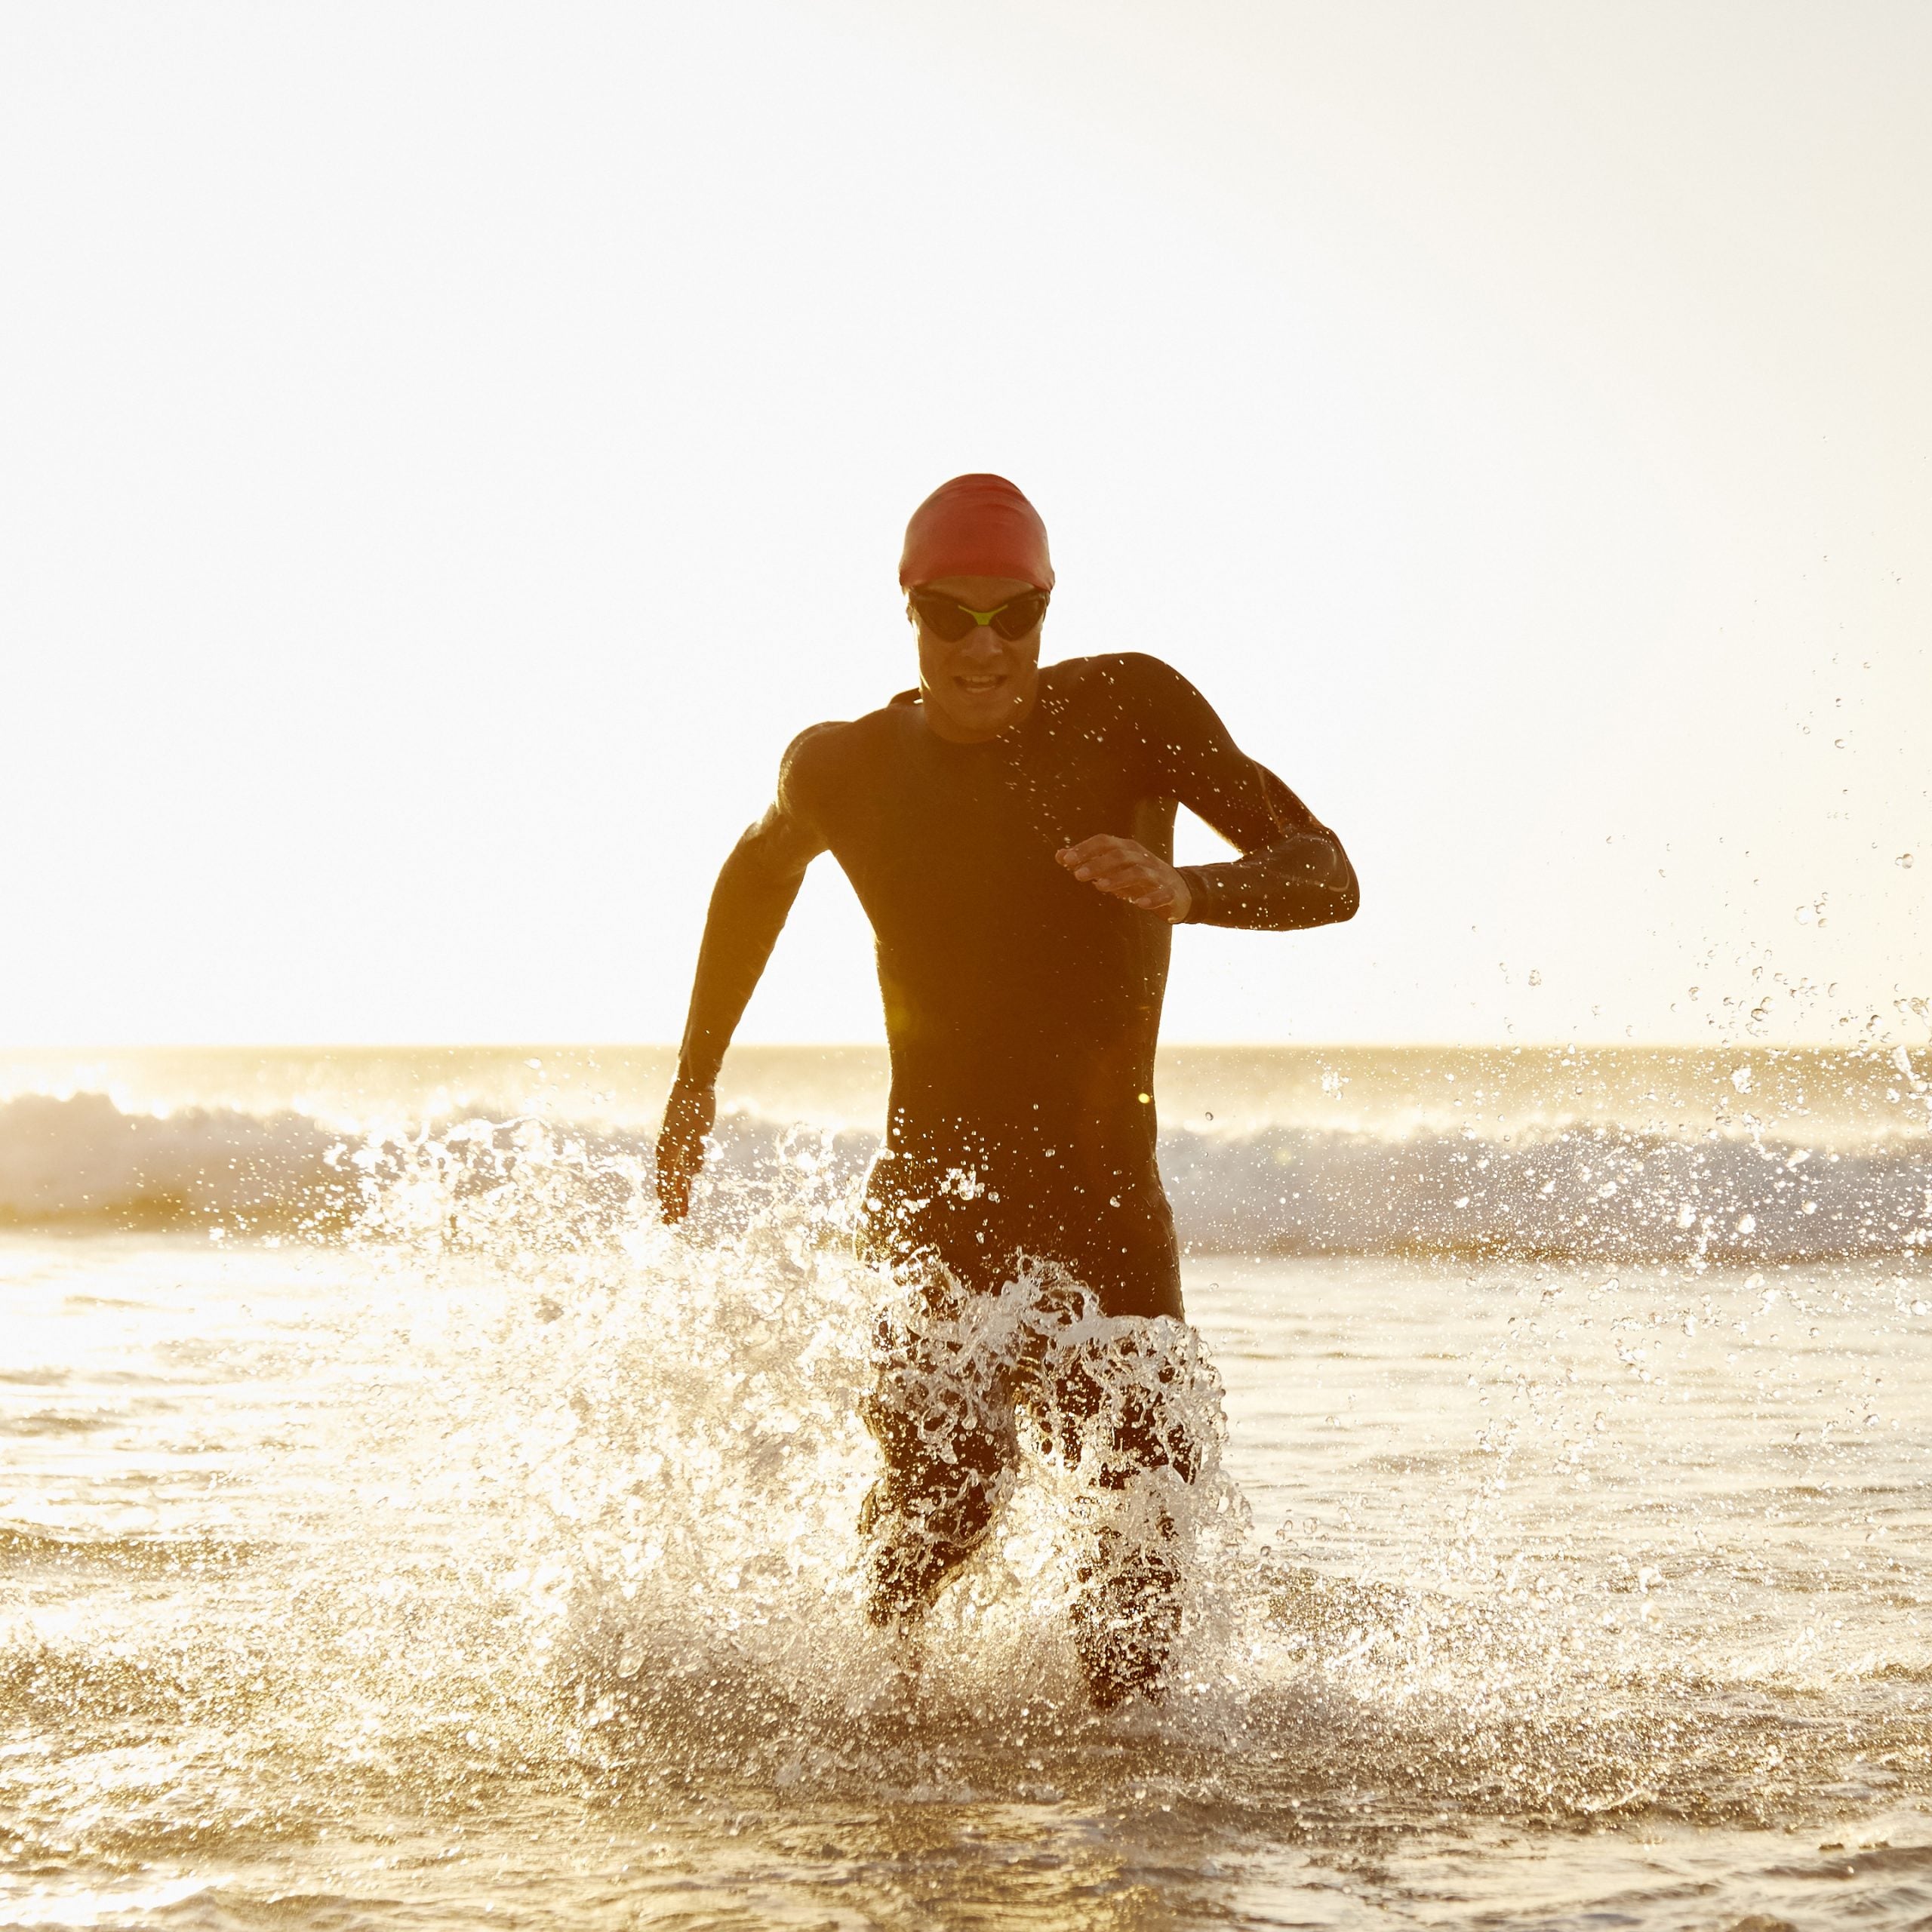 Why Do Rich People Love Endurance Sports?